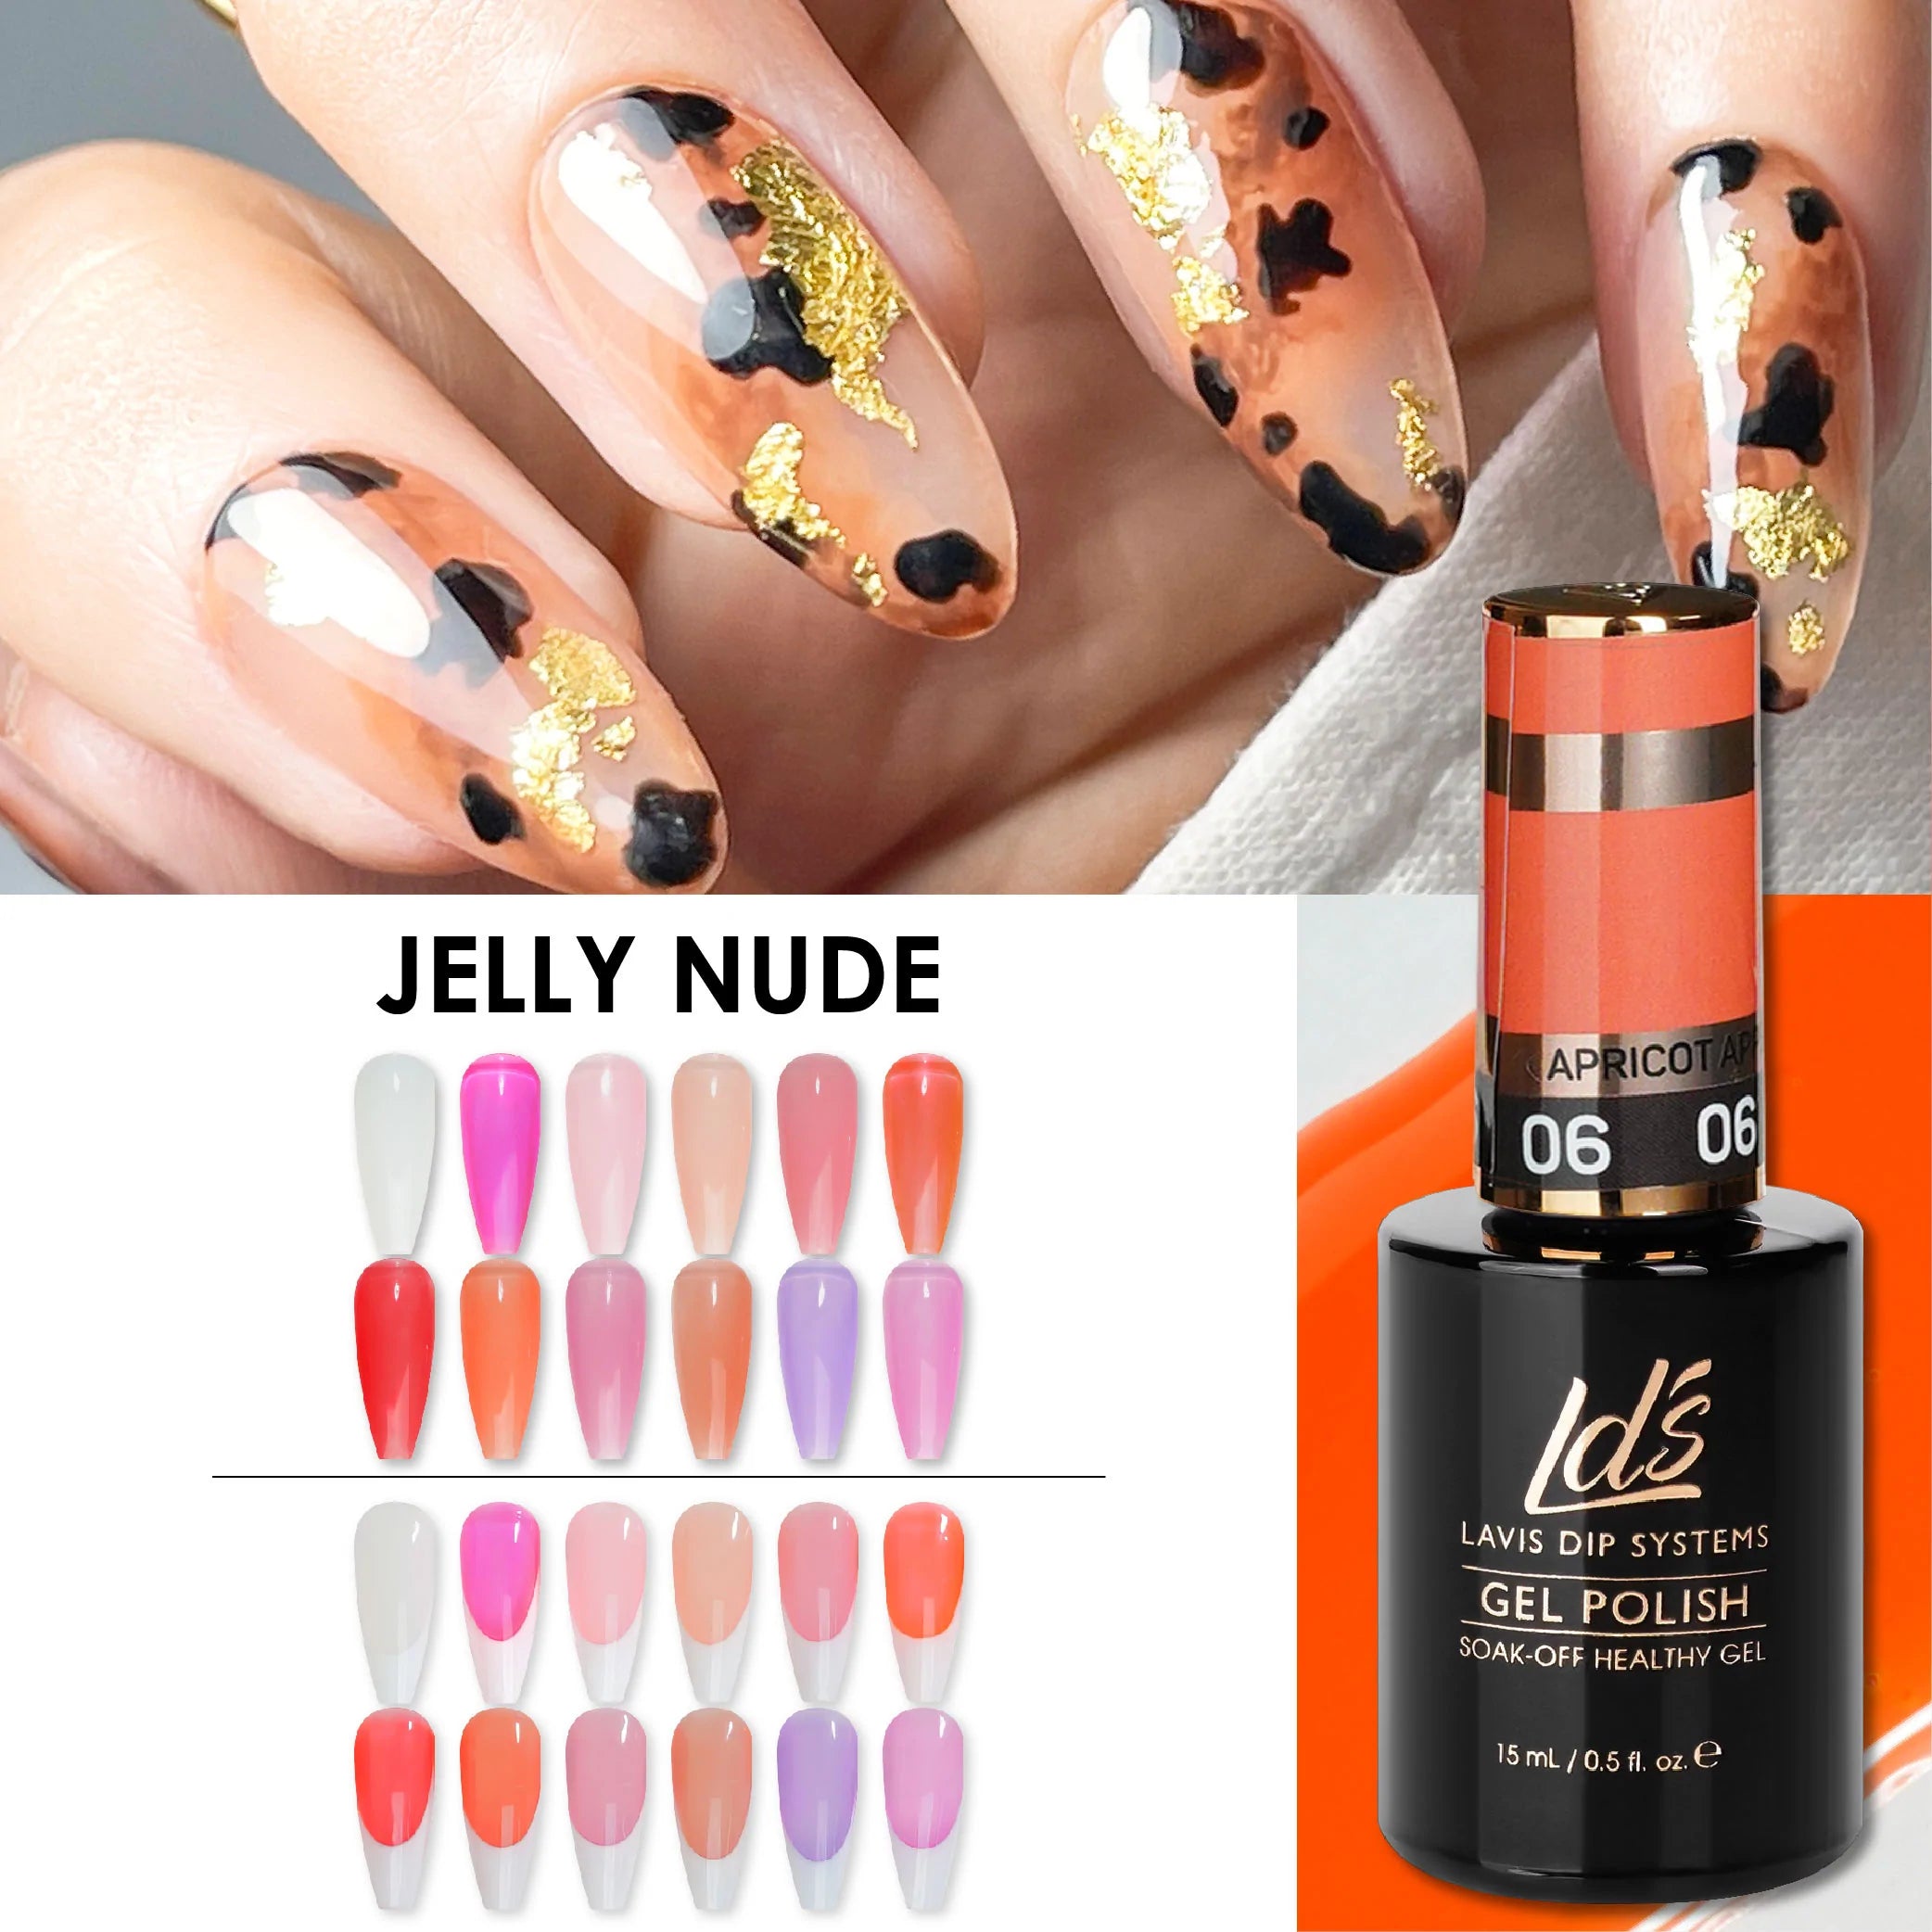 LDS JELLY NUDE COLLECTION